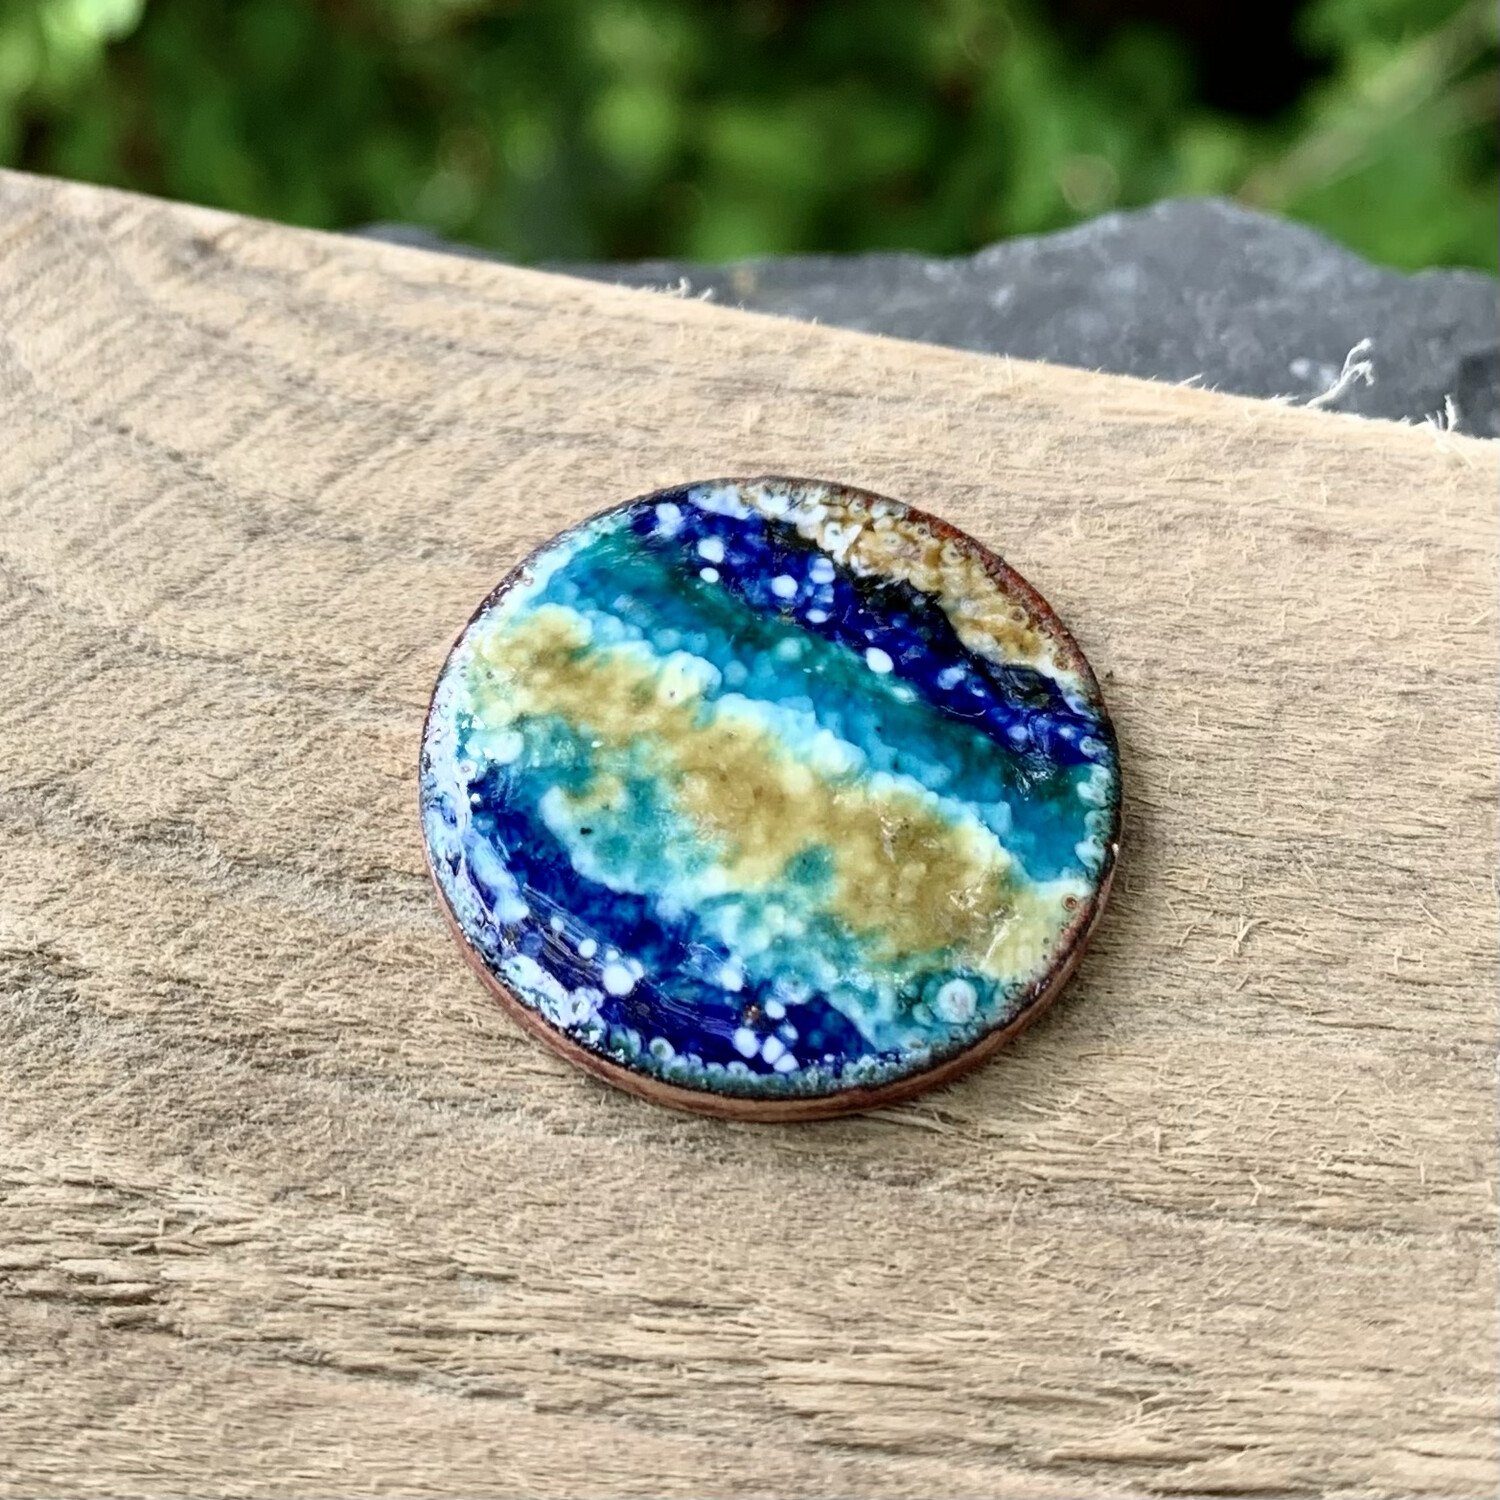 Art & Design Teacher CPD Course - One to One - Enameling - 1 Day